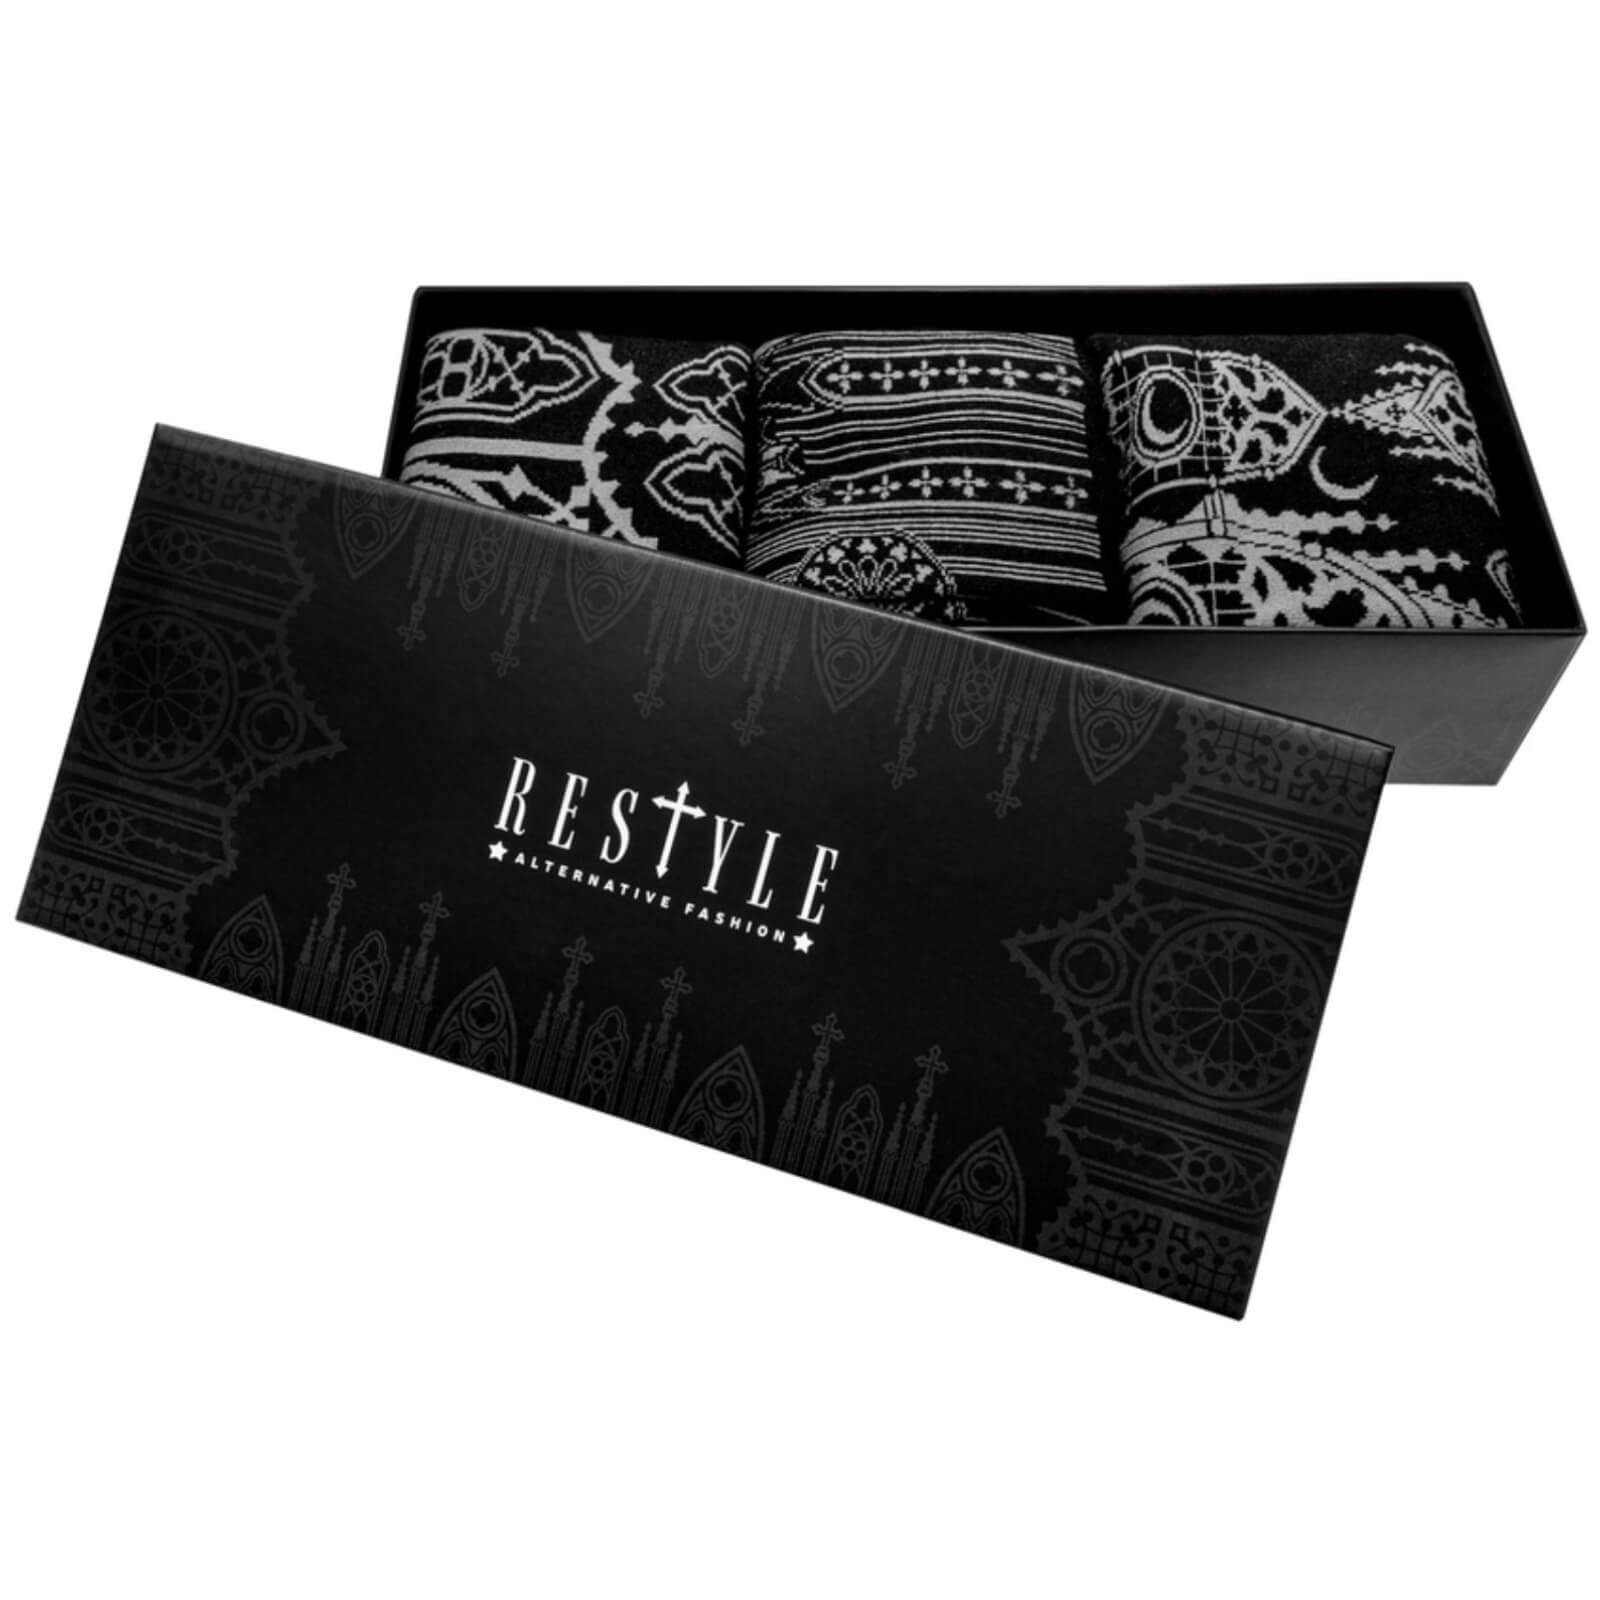 Restyle Cathedral Moon Jacquard Unisex Socks Present Gift Box